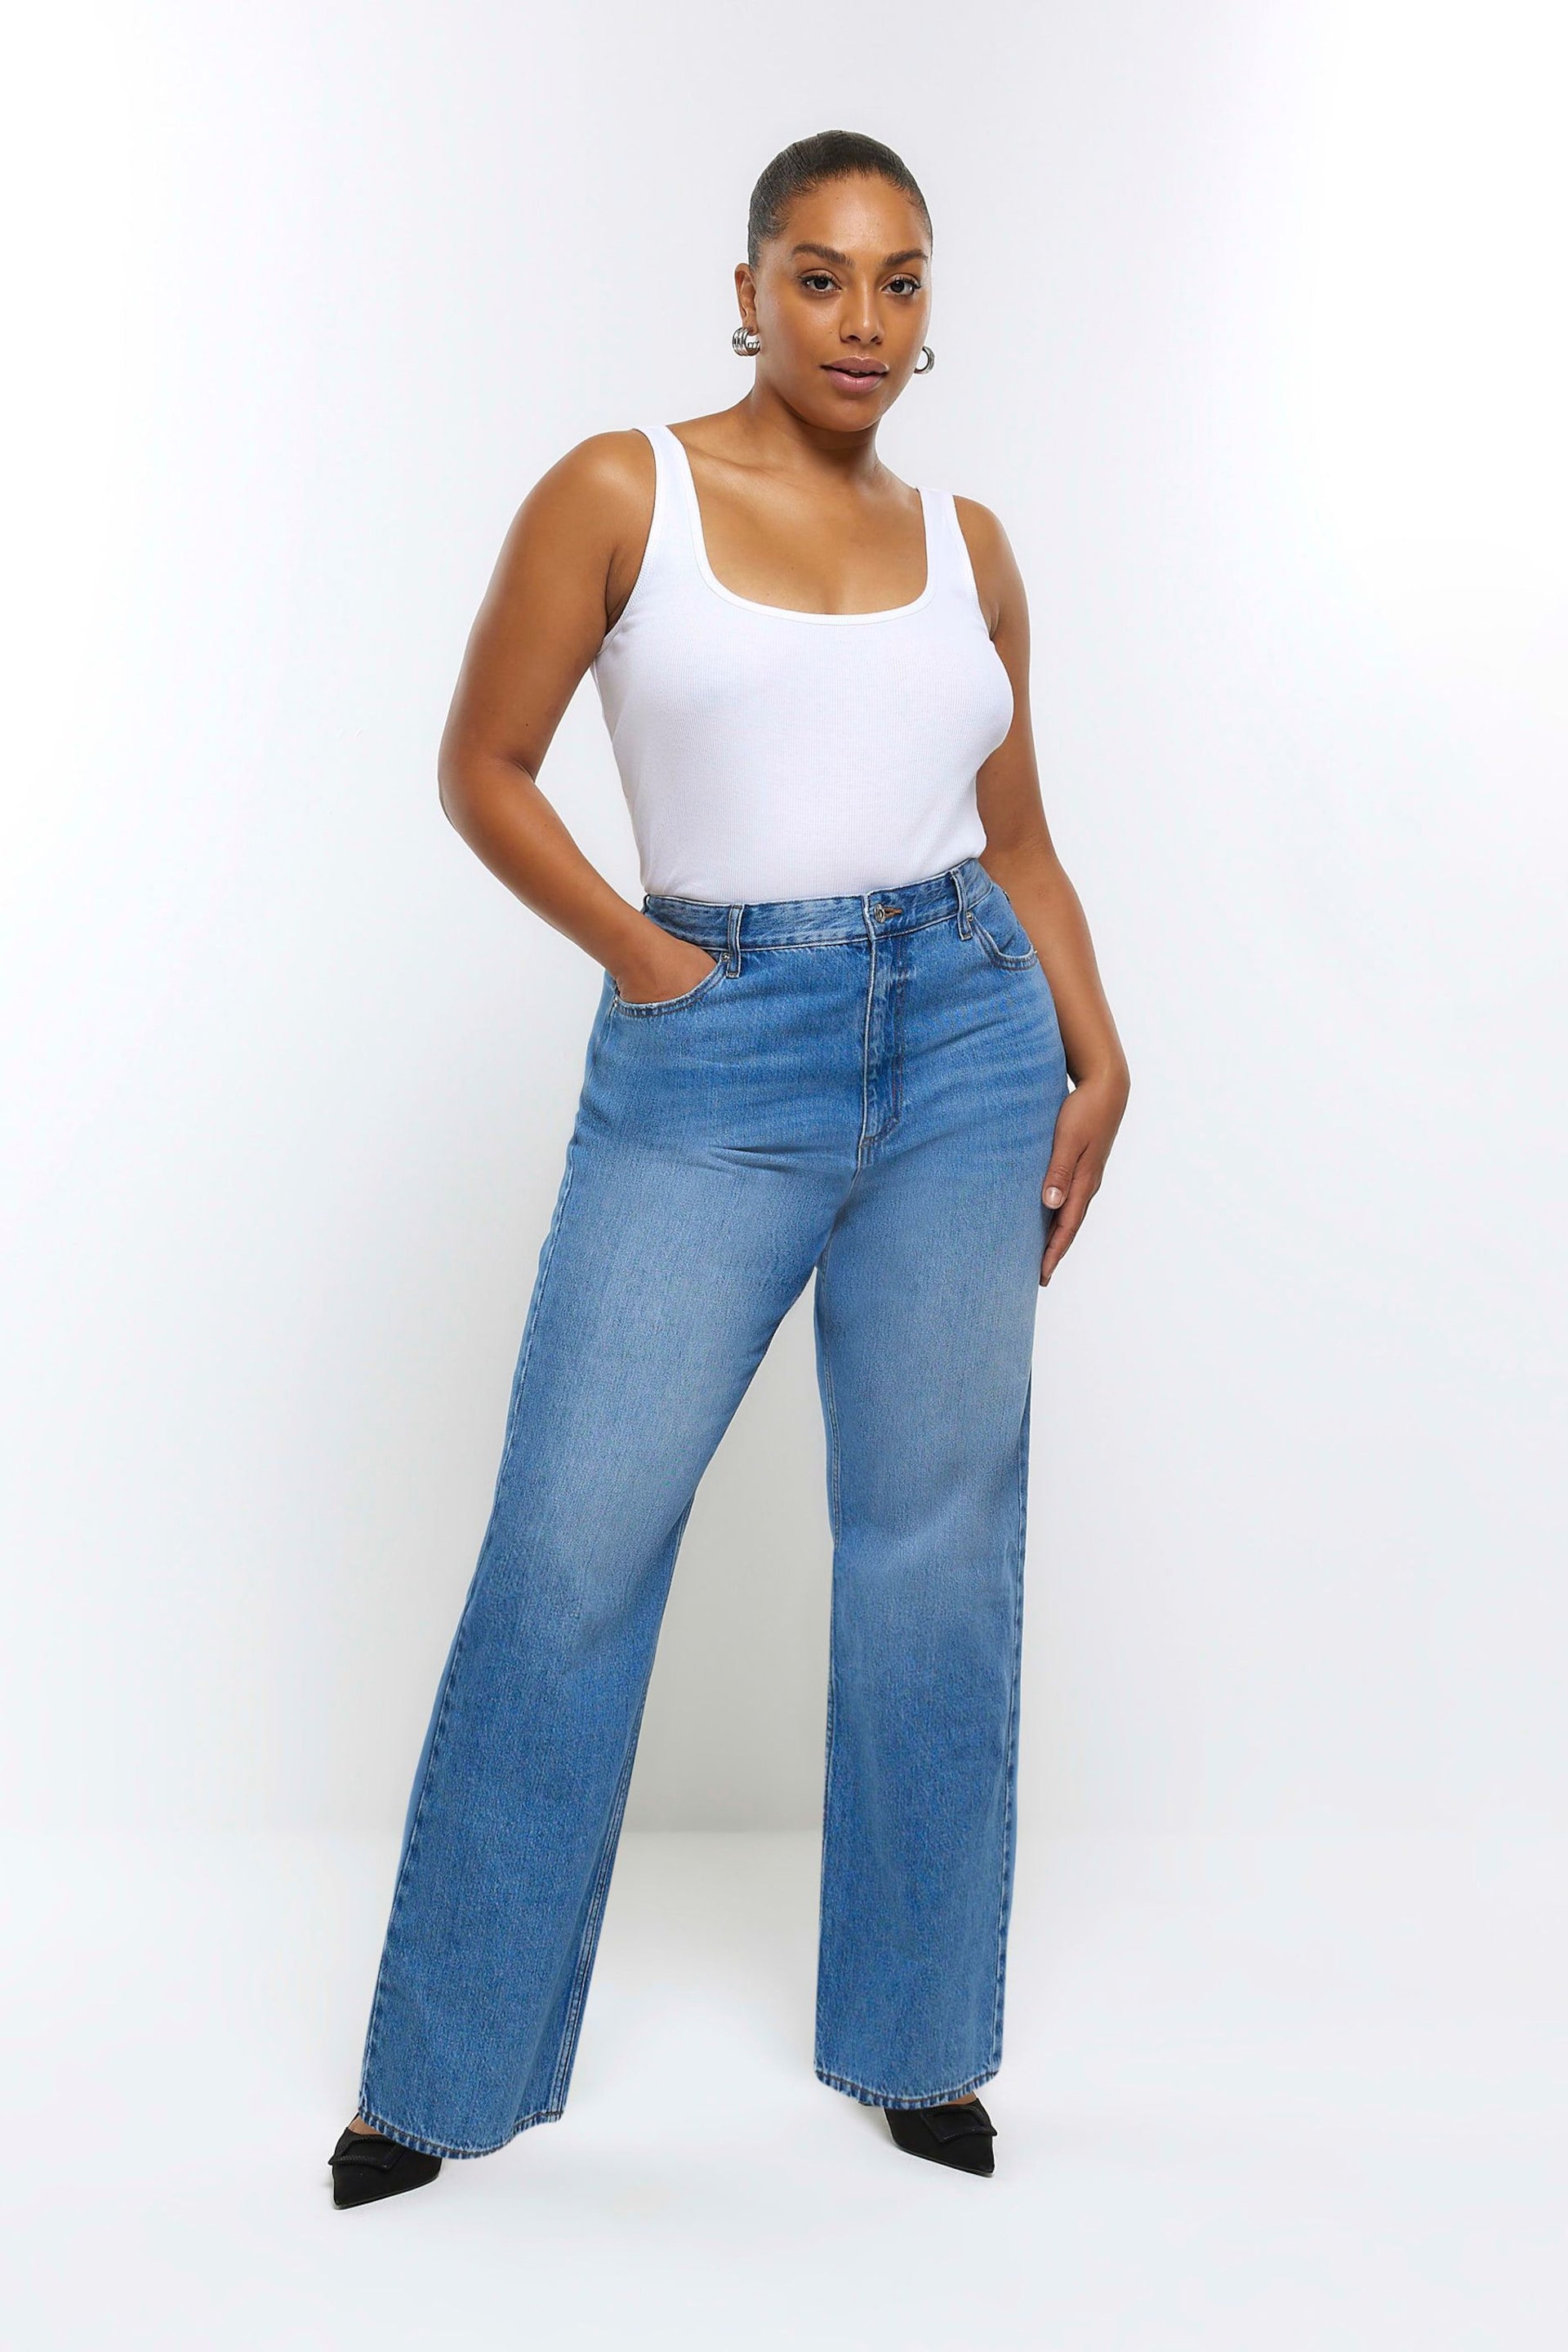 River Island Blue Curve 90s Long Straight Leg High Rise Jeans - Image 2 of 5